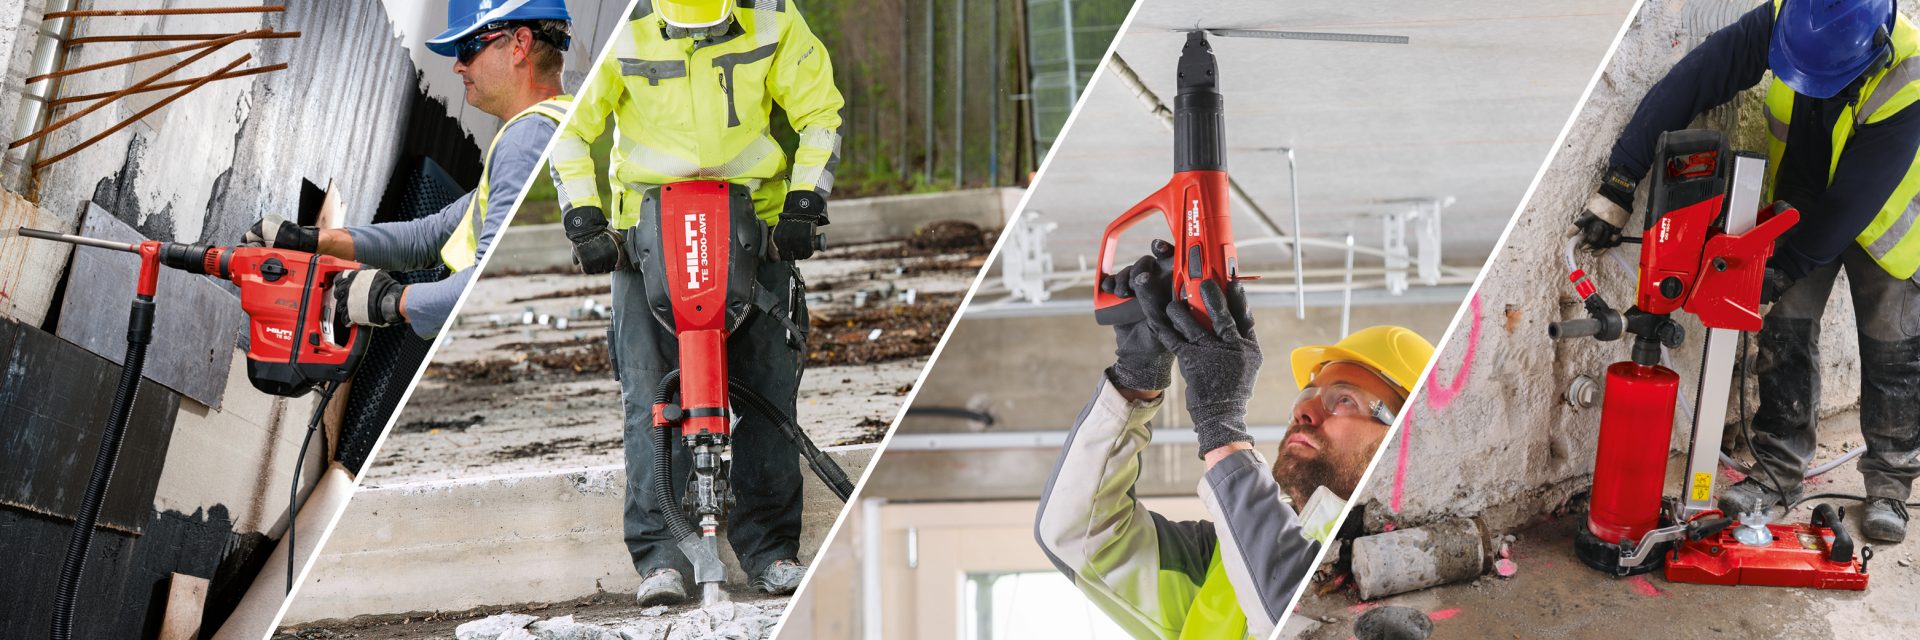 Hilti Innovation for Hire